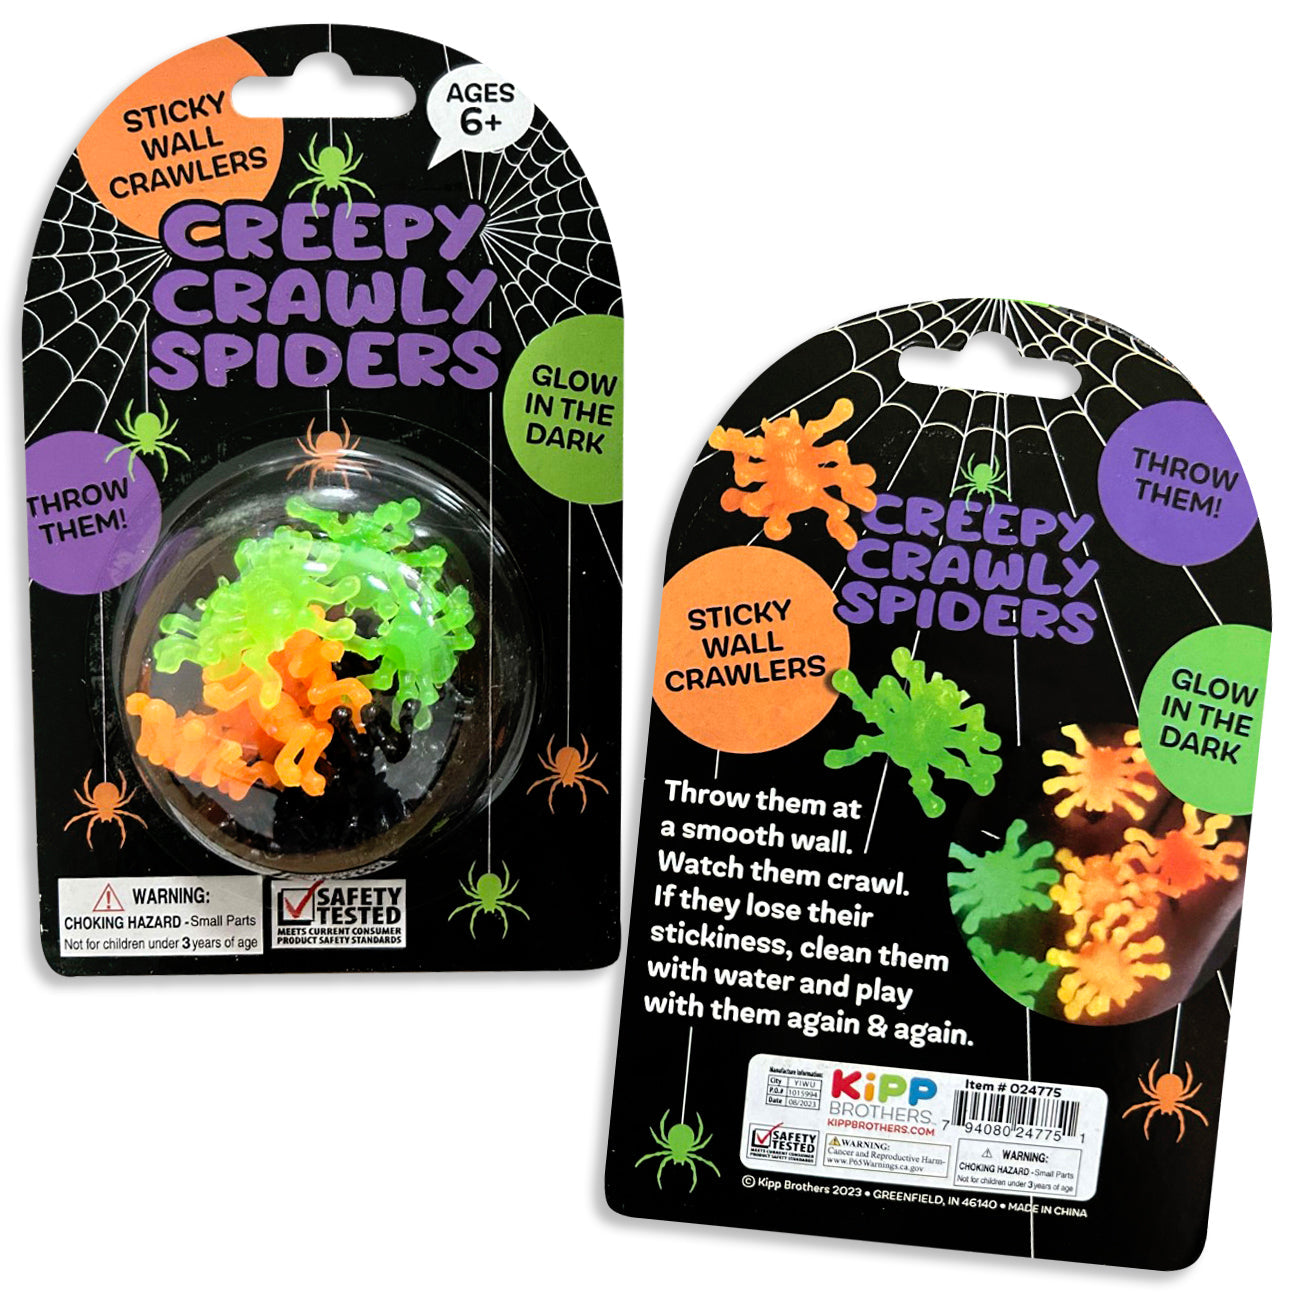 Glow In The Dark Sticky Spiders- Store Surplus No Display - 12 Pieces Per Pack 24775L